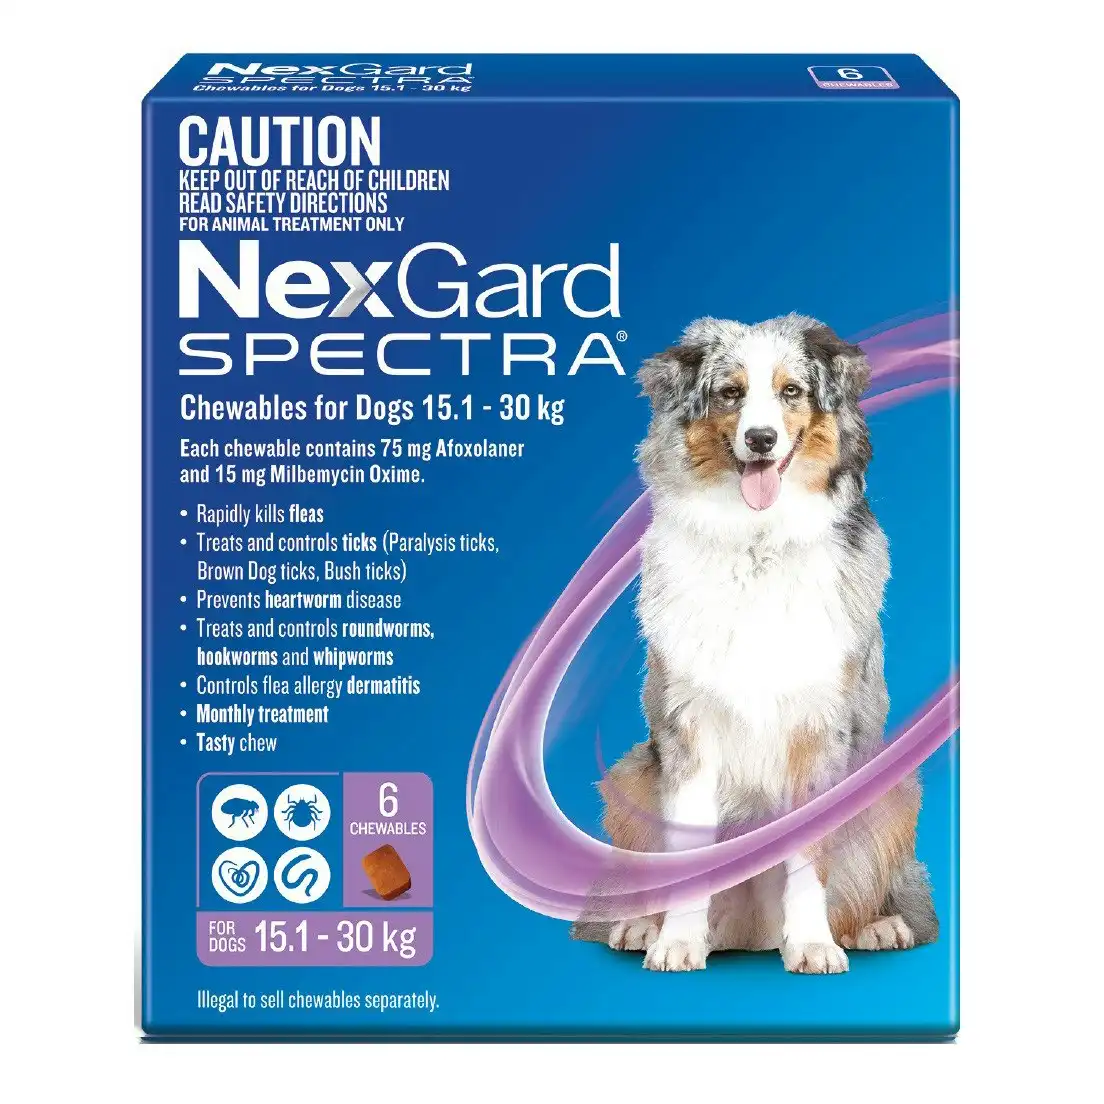 Nexgard Spectra Chewables For Dogs 15.1 - 30kg 6 Pack